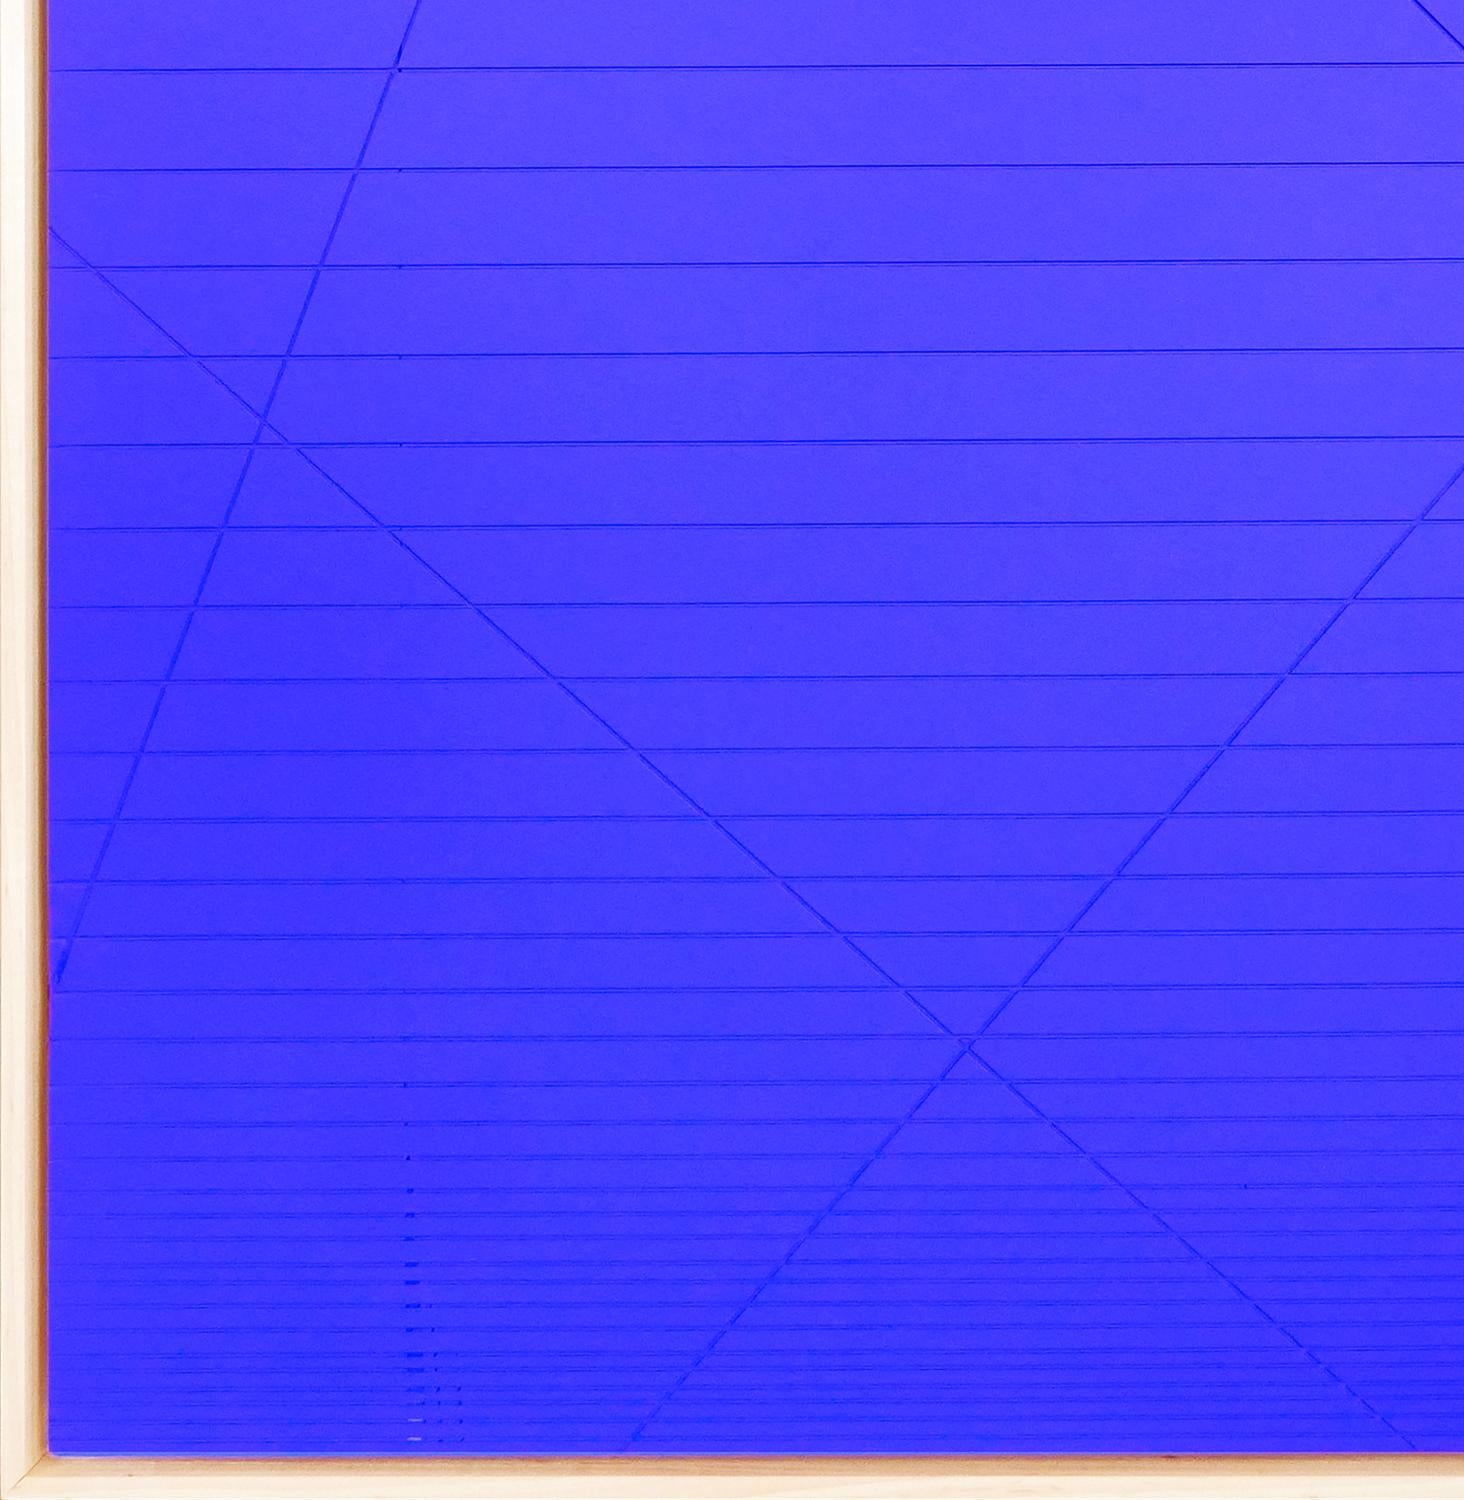 Contemporary Abstract Bright Blue Geometric Linear Groove Painting / Sculpture 1